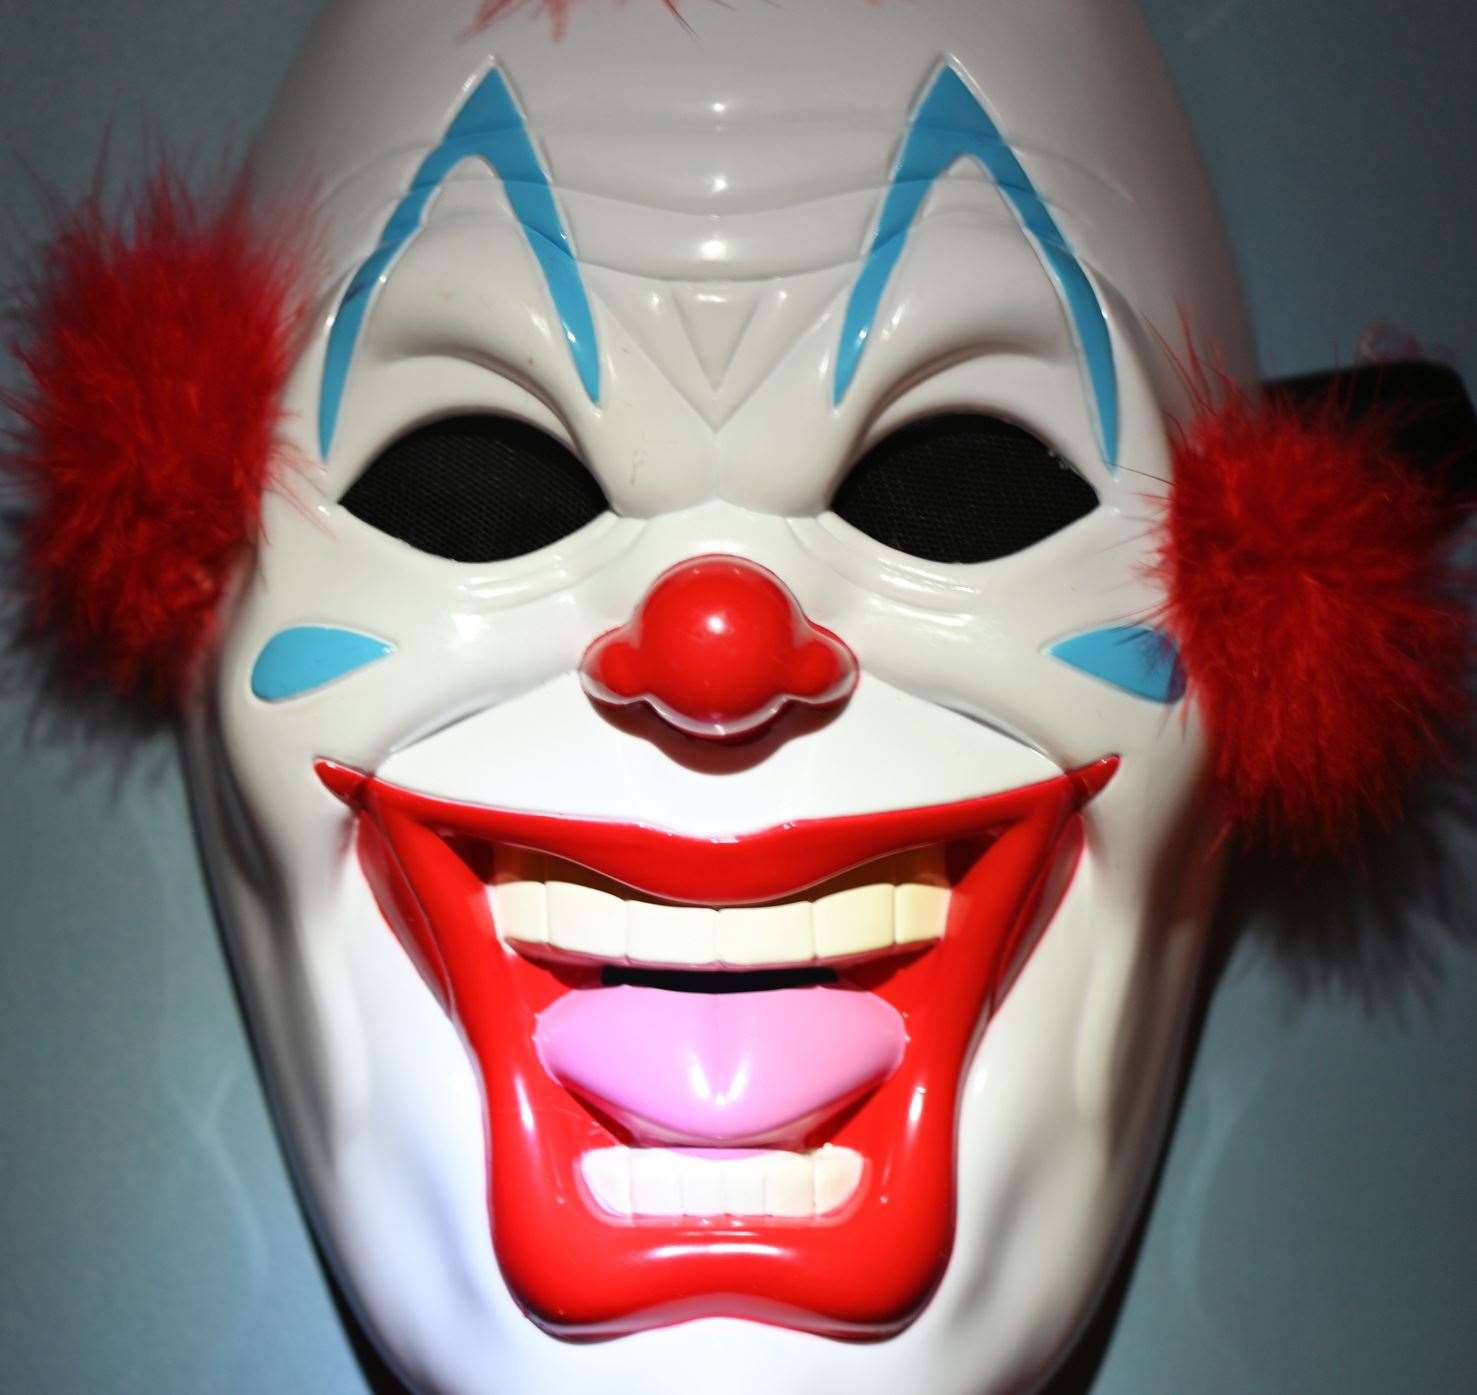 Two teenage boys were left shaken after reportedly being stalked by a "killer clown" near Herne Bay seafront. Picture: istock/steverts